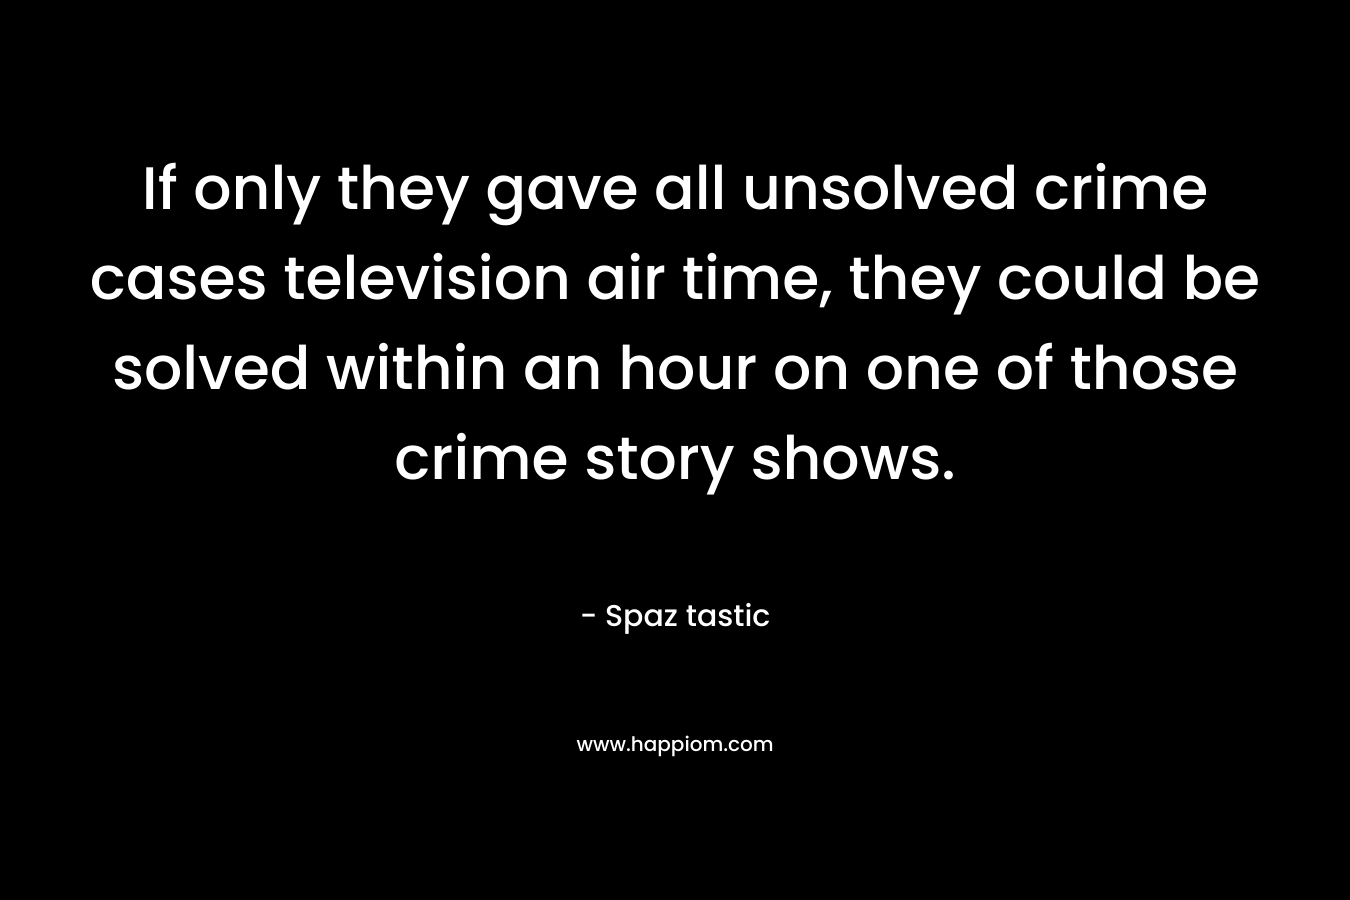 If only they gave all unsolved crime cases television air time, they could be solved within an hour on one of those crime story shows. – Spaz tastic